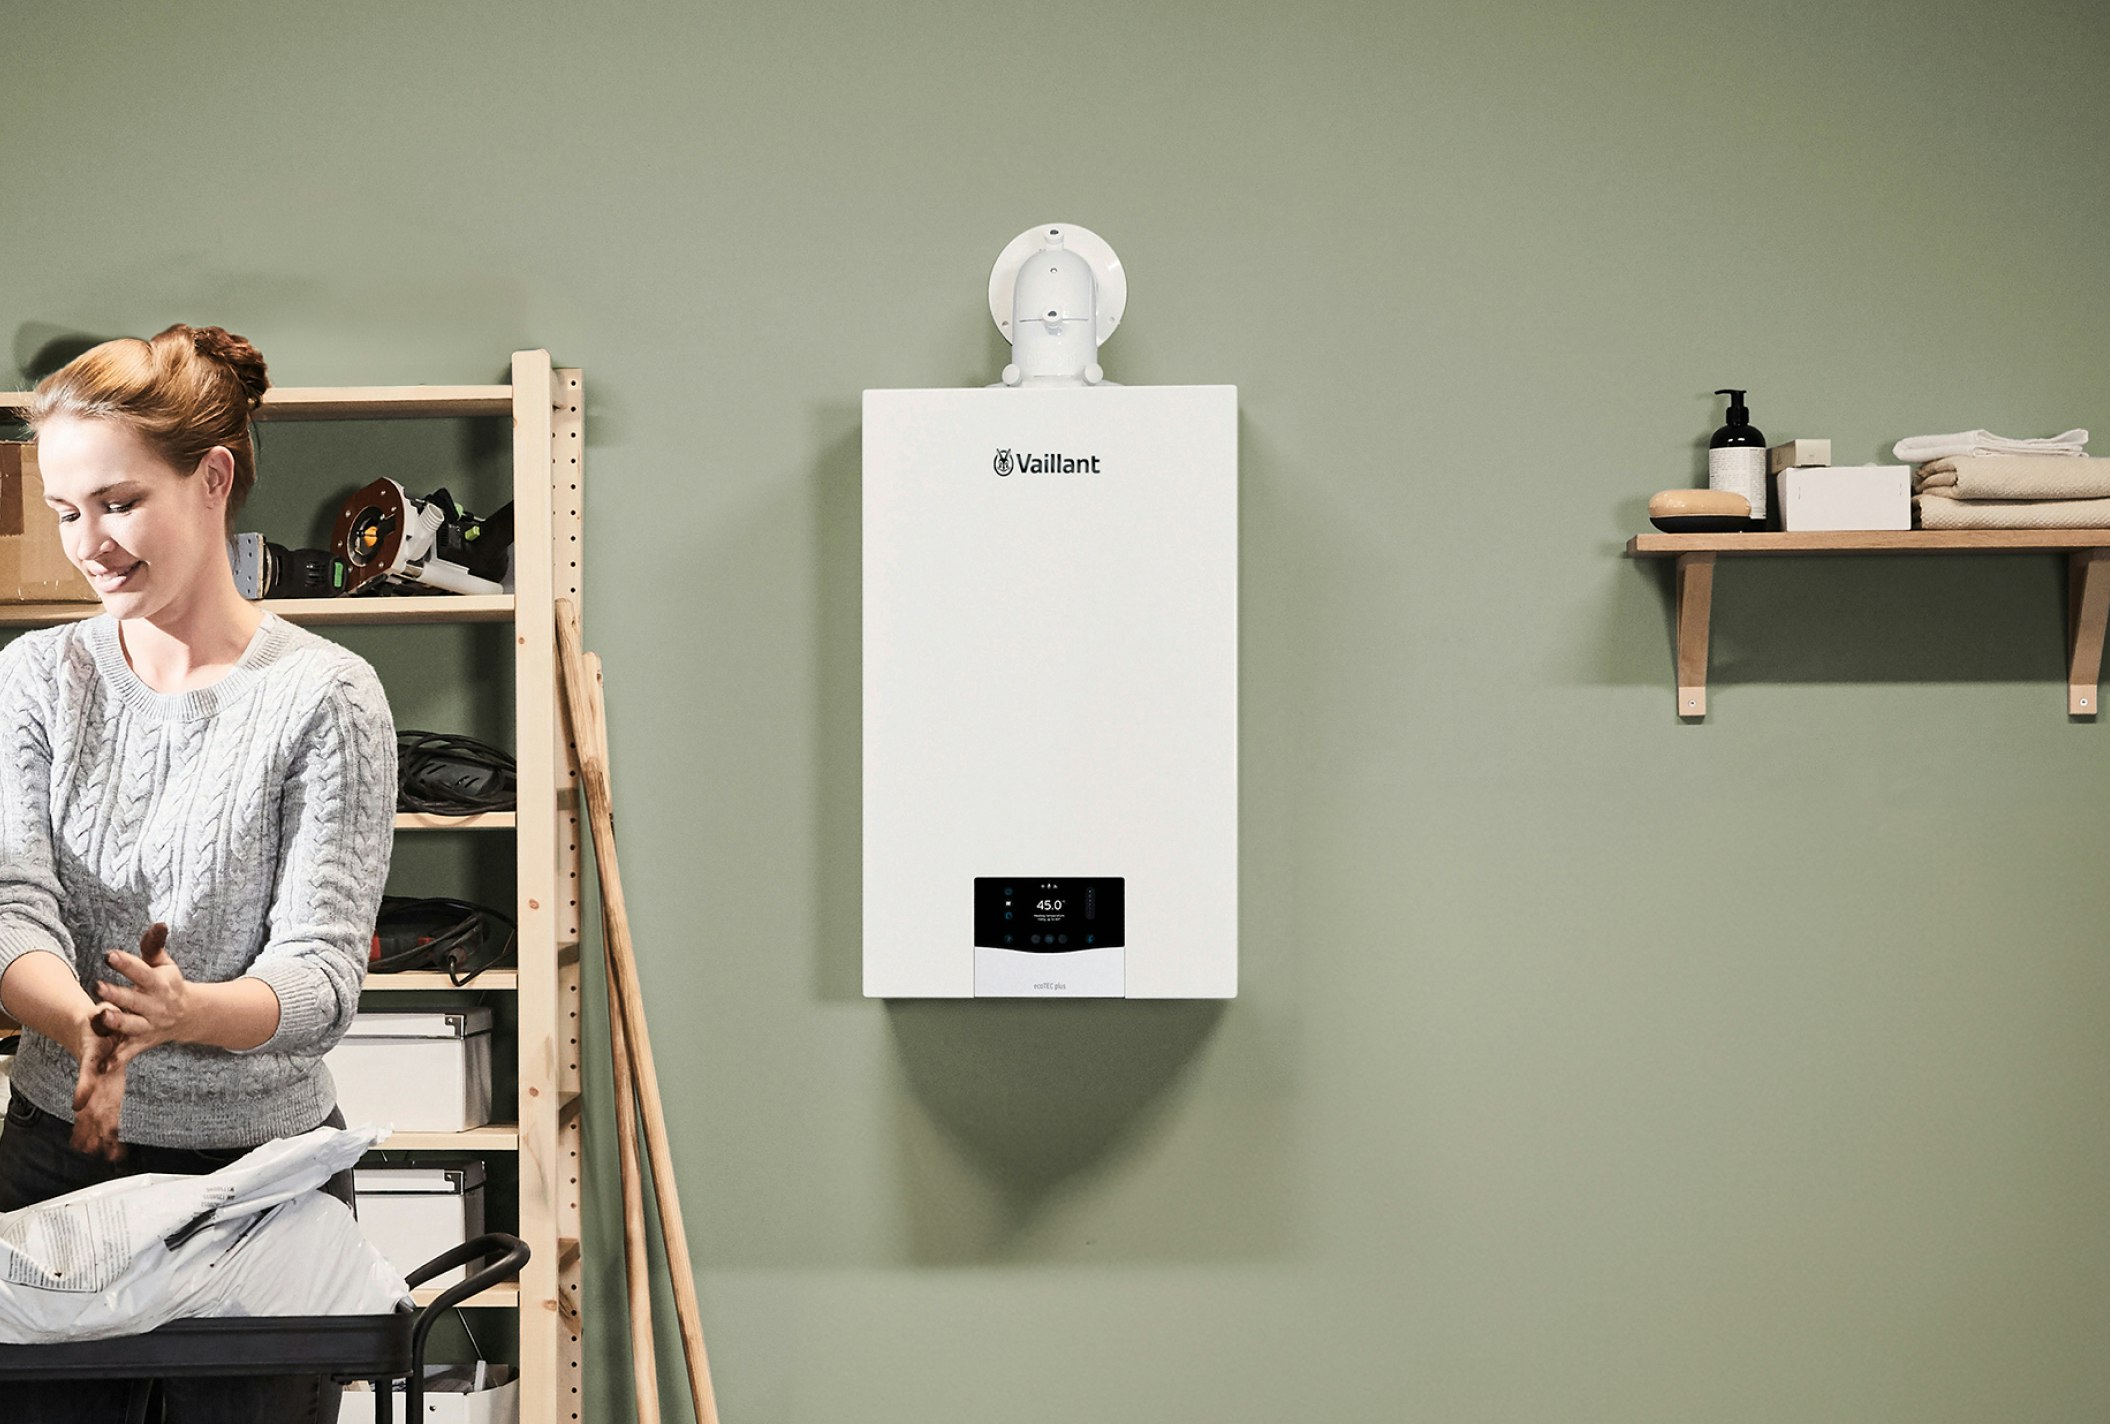 A Vaillant boiler installed on a green wall, with a smiling woman to the side of the image